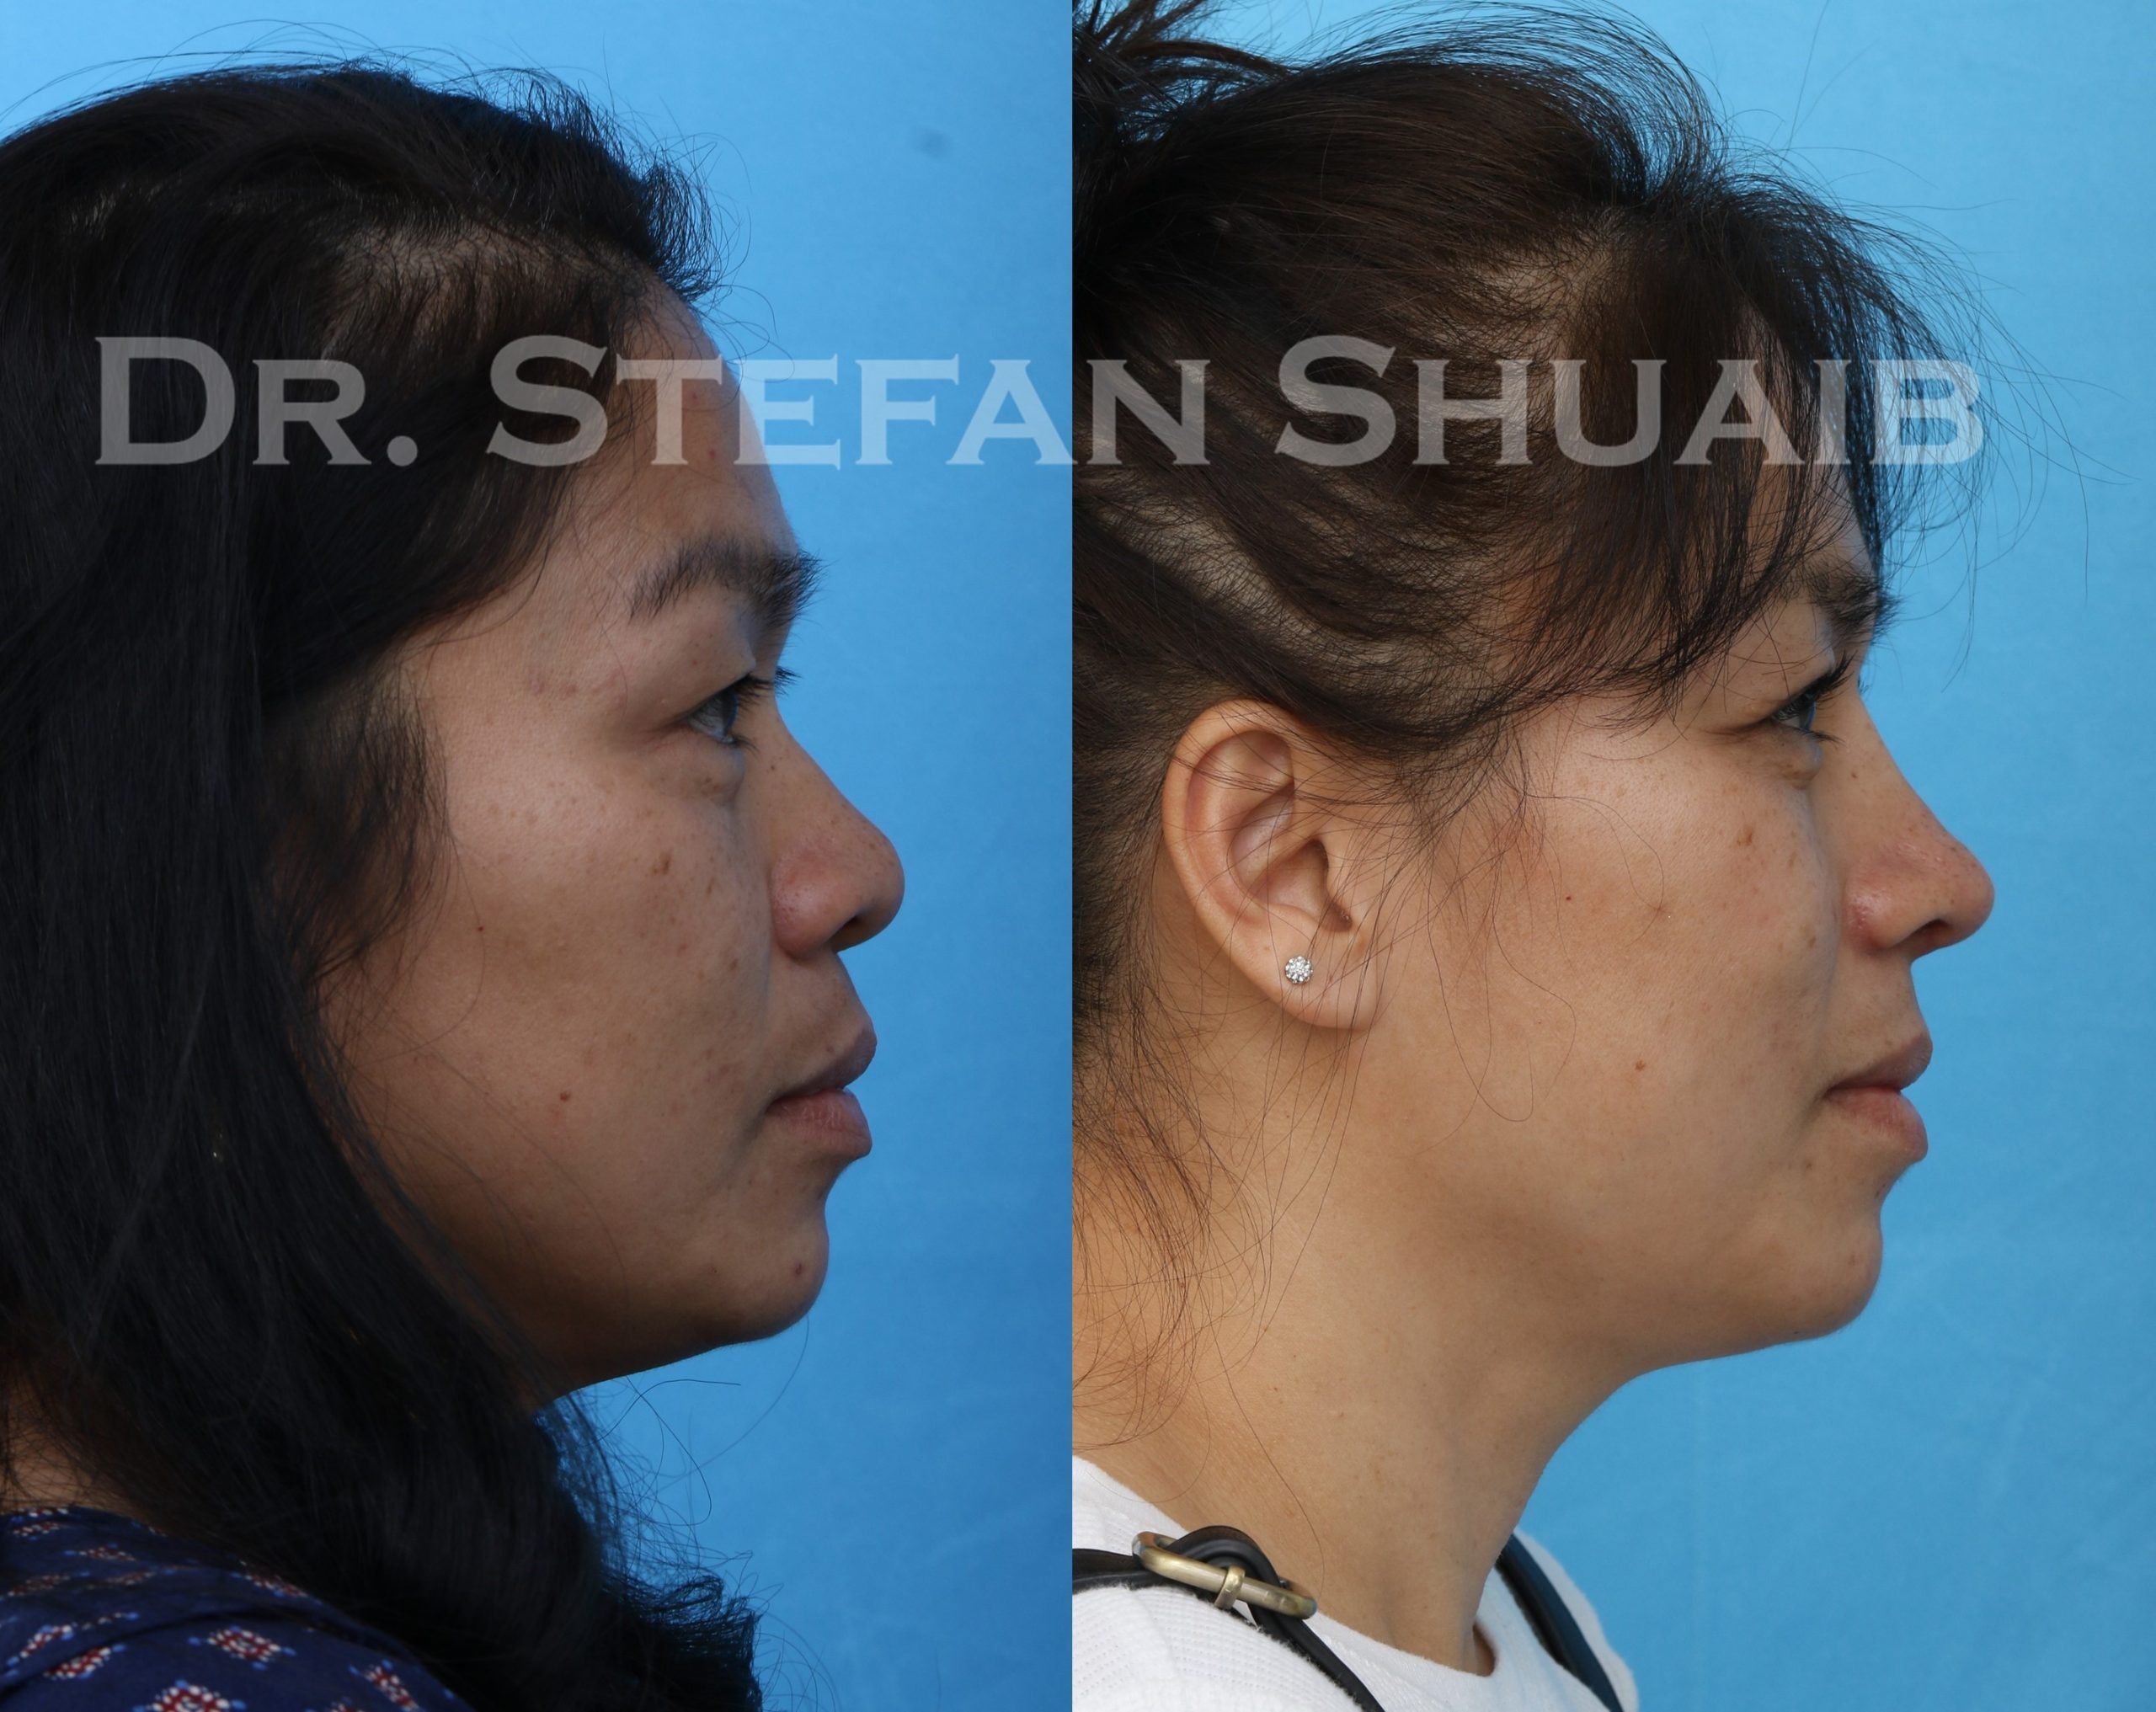 Patient before and after augmentation rhinoplasty as well as upper and lower blepharoplasty